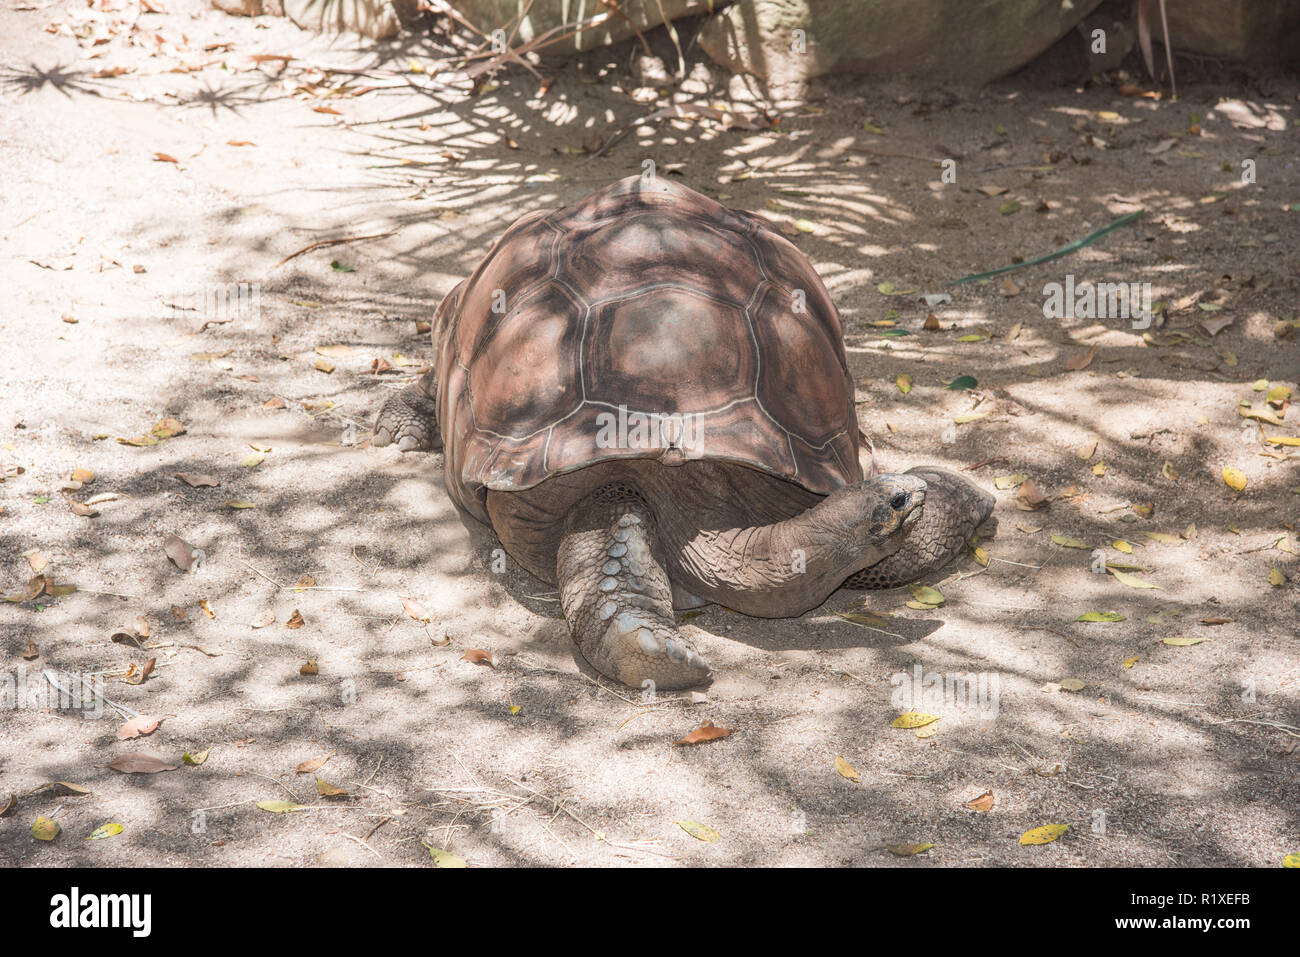 Sydney, New South Wales, Australia-December 21,2016:  Large Galapagos tortoise in an outdoor enclosure at the Taronga Zoo in Sydney, Australia Stock Photo